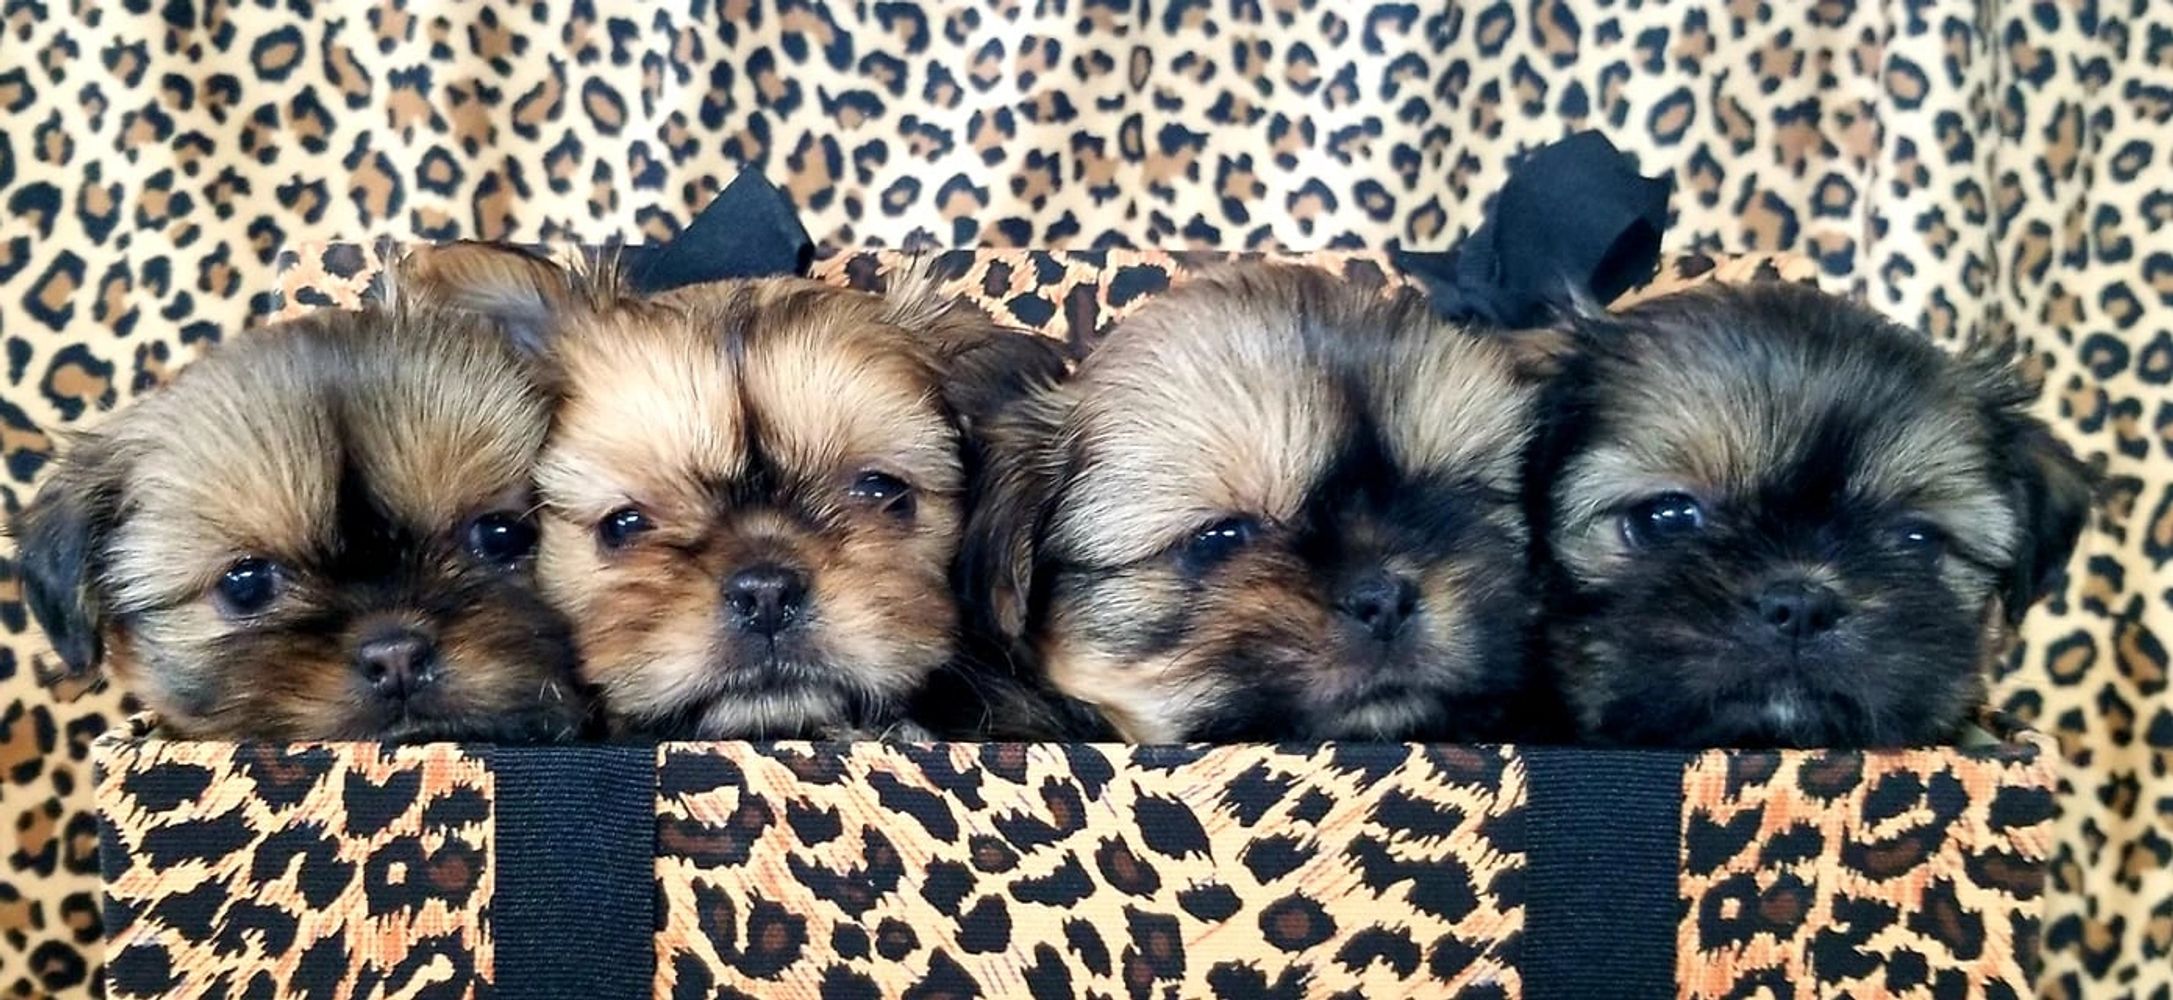 All About Shih Tzu Puppies